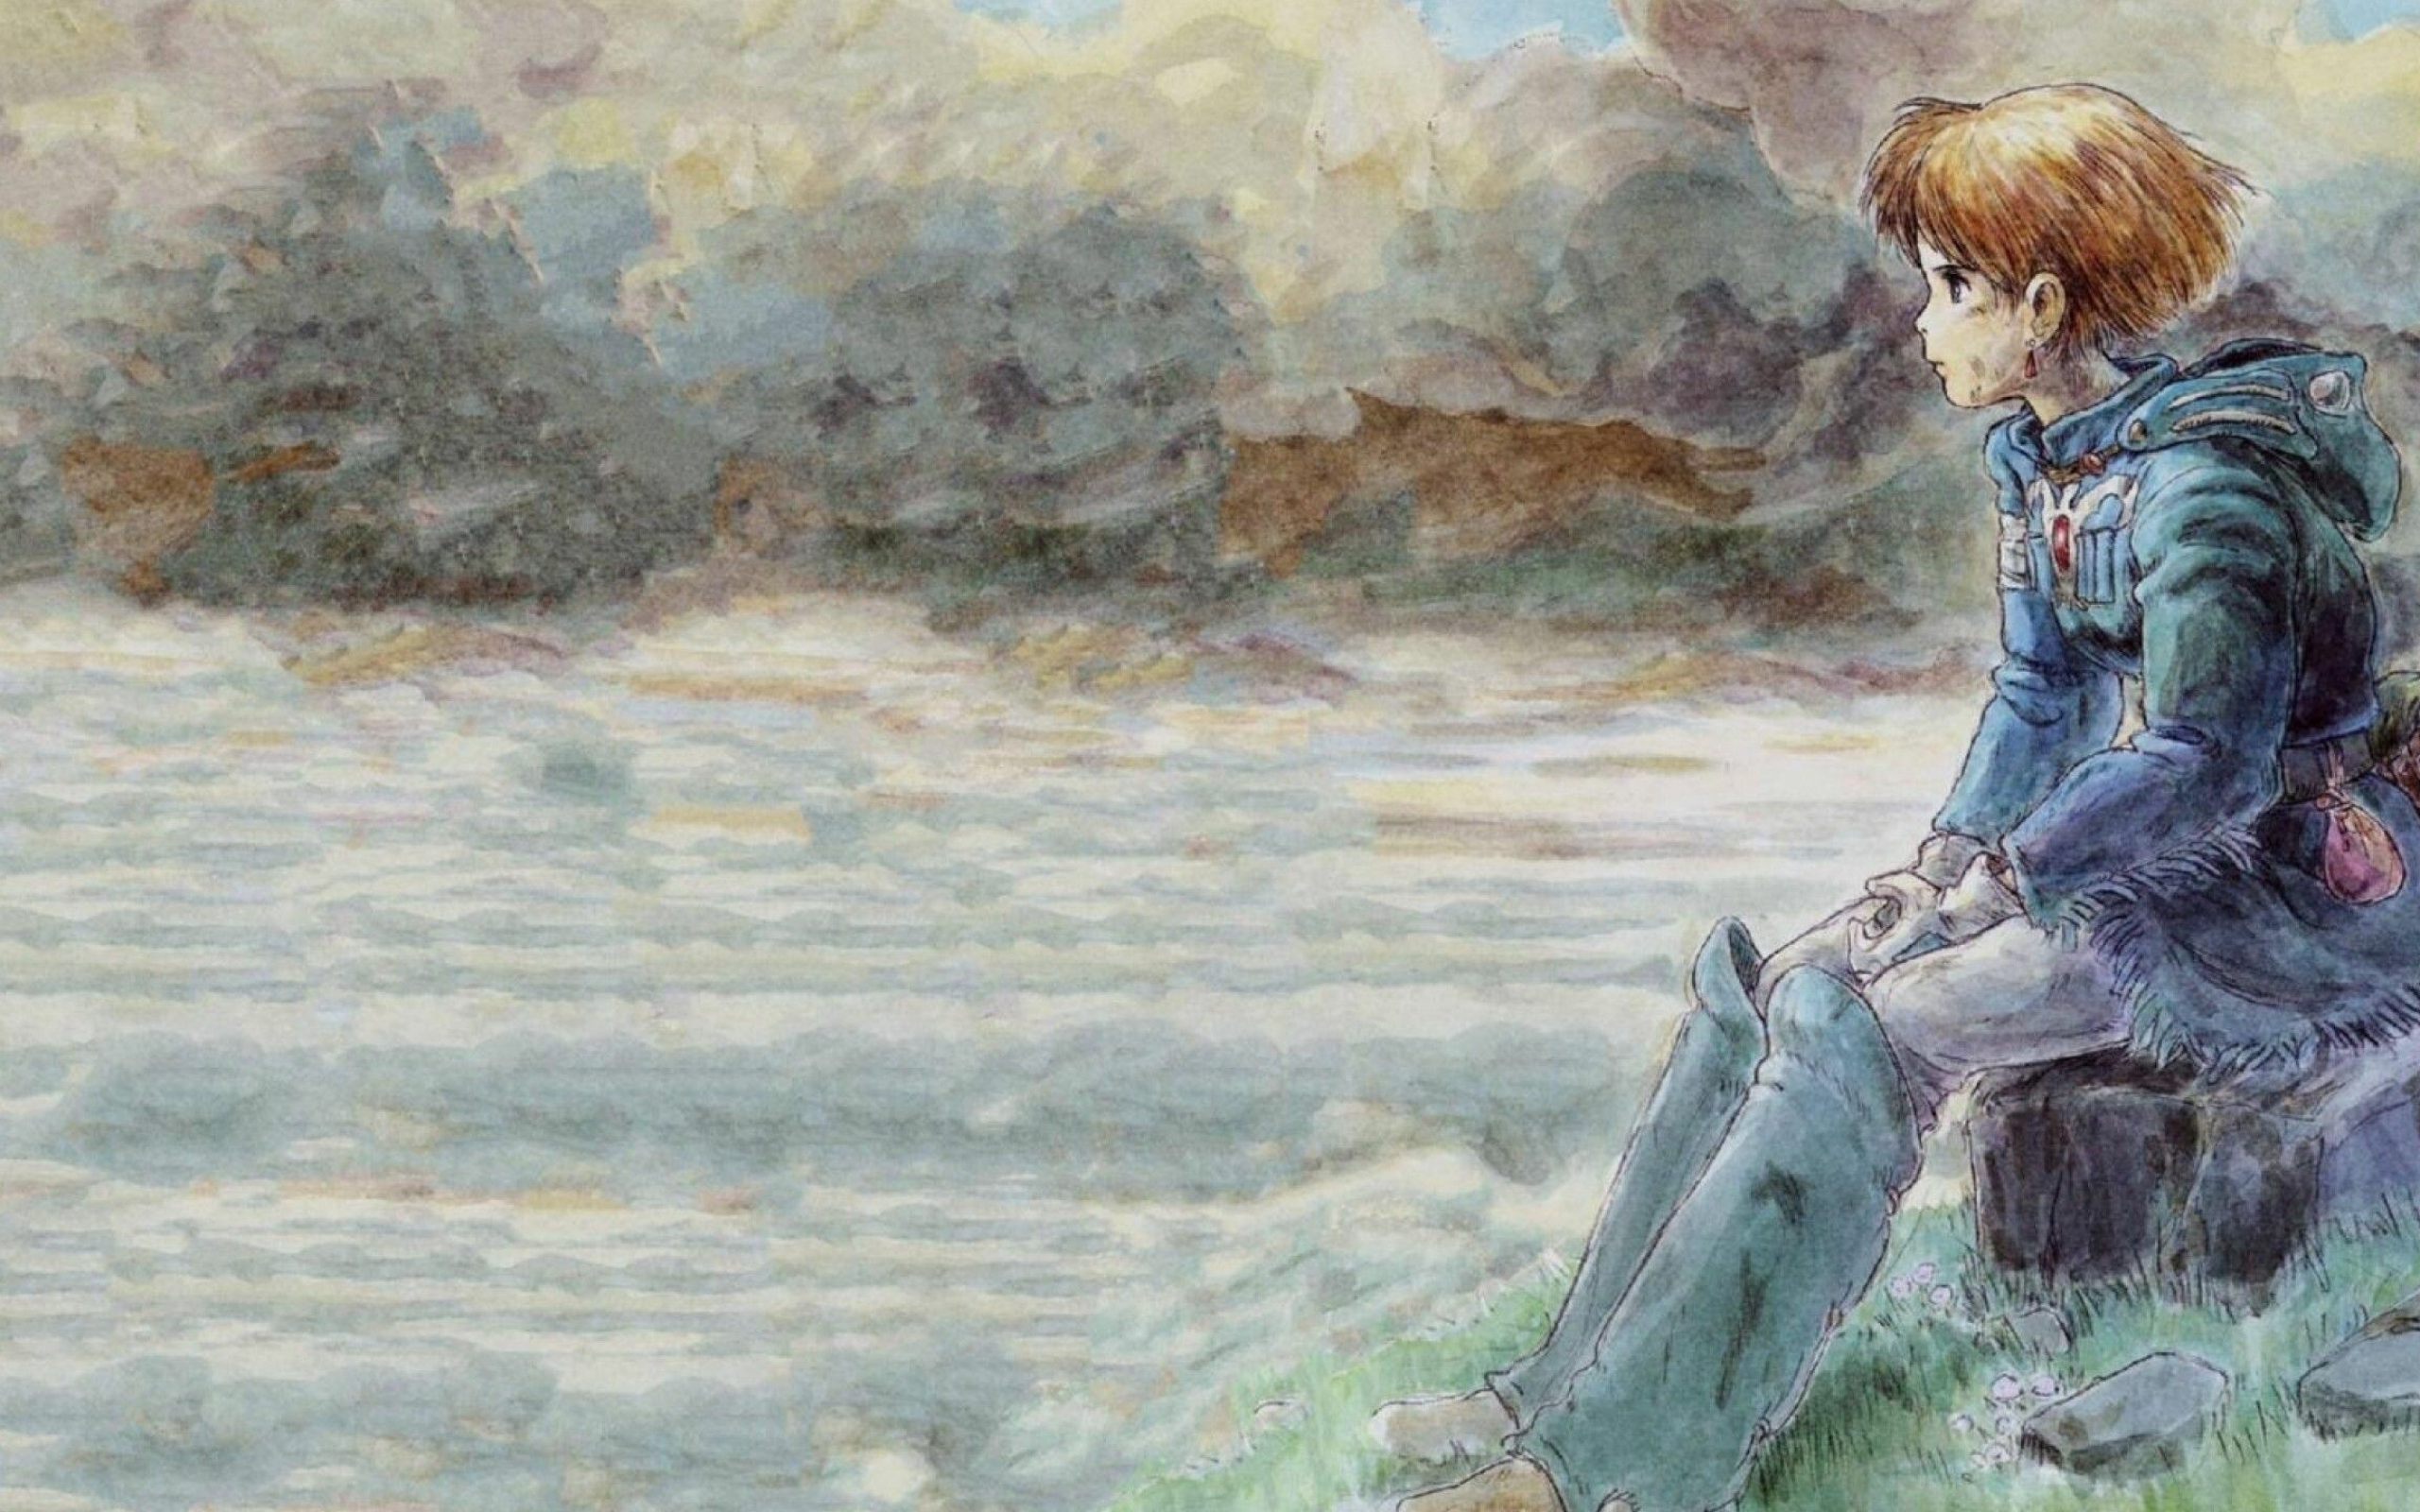 Nausicaa of the Valley of the Wind: Warrior and pacifist Princess, 1,000 years after the Seven Days of Fire. 2560x1600 HD Wallpaper.